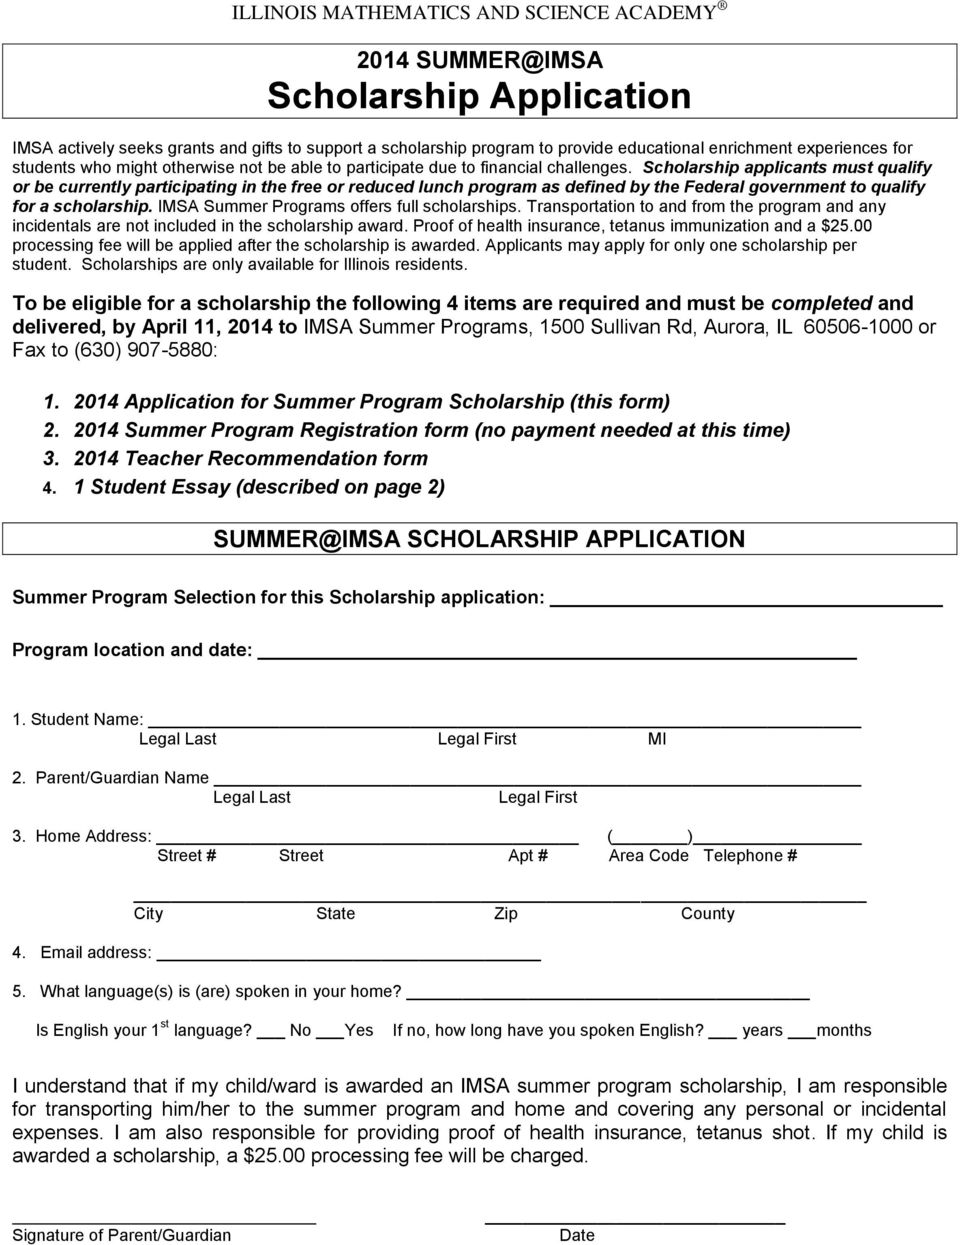 Scholarship applicants must qualify or be currently participating in the free or reduced lunch program as defined by the Federal government to qualify for a scholarship.